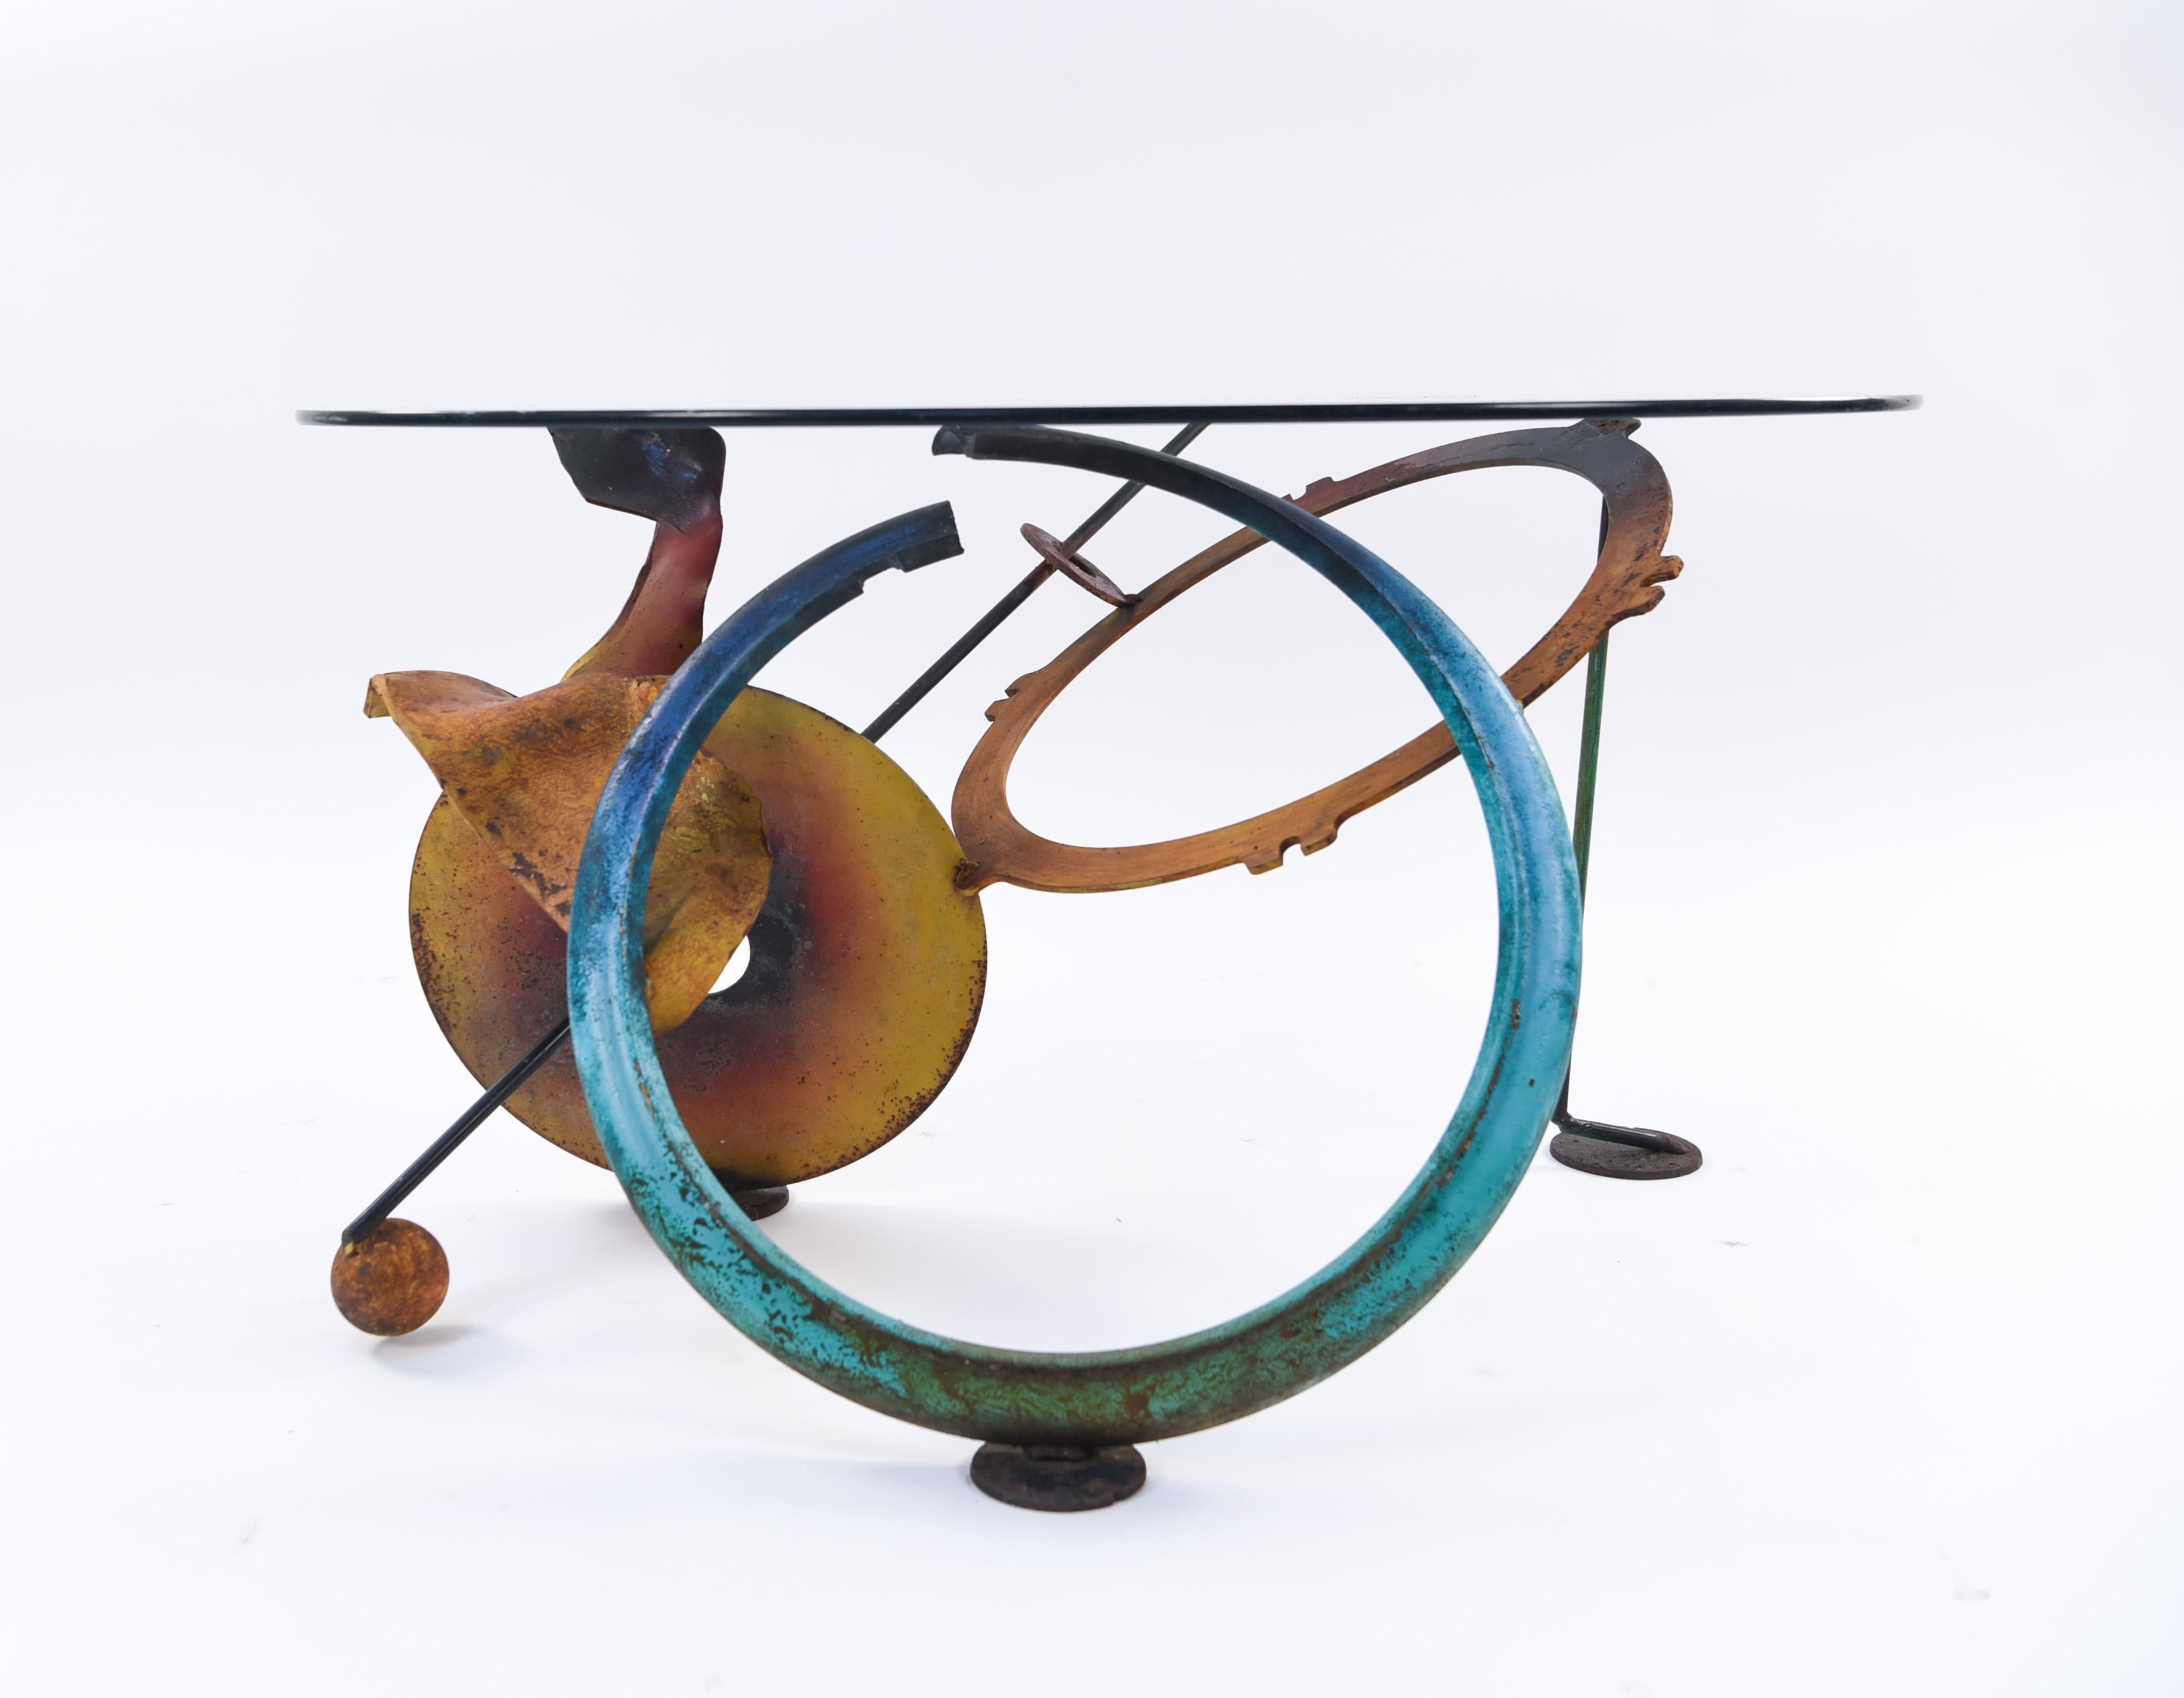 Painted iron and glass. Canadian export stamp inside blue ring.
This sculptural table, with its asymmetrical lines and playful color, is like a Kandinsky painting come to life. This piece would make a statement as the center table in an